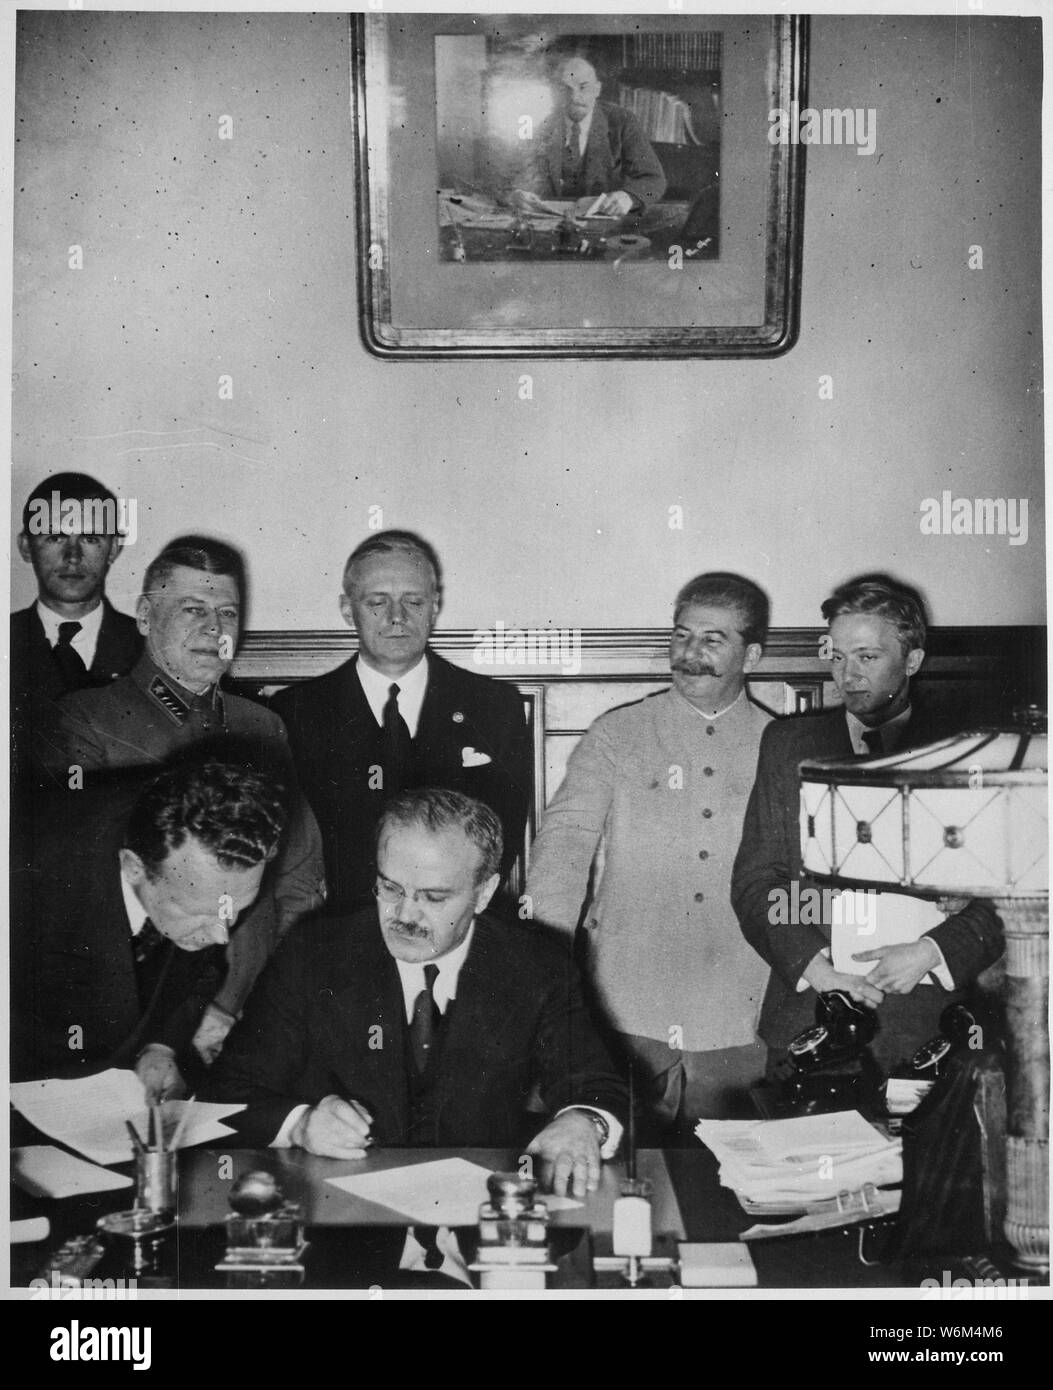 Soviet Foreign Minister Molotov signs the German-Soviet Boundary and Friendship Treaty; Joachim von Ribbentrop and Josef Stalin stand behind him, Moscow, September 28. 1939. Von Ribbentrop Collection., ca. 1946 - ca. 1946   Original incorrect title:   Soviet Foreign Minister Molotov signs the German-Soviet non-aggression pact; Joachim von Ribbentrop and Josef Stalin stand behind him, Moscow, August 23. 1939. Von Ribbentrop Collection., ca. 1946 - ca. 1946; General notes:  Use War and Conflict Number 990 when ordering a reproduction or requesting information about this image. Stock Photo